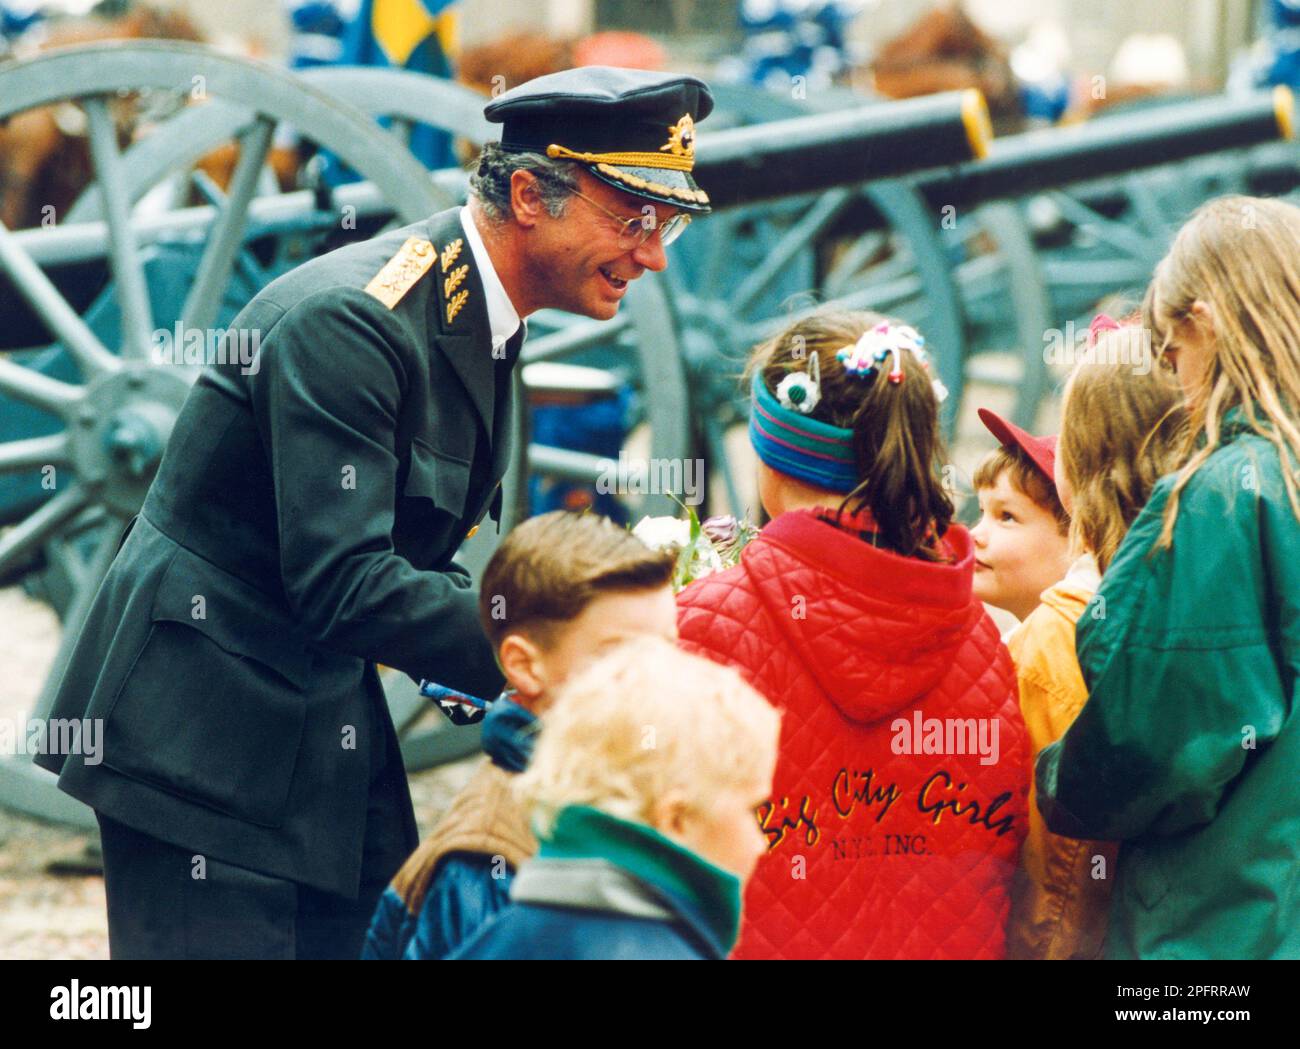 KING CARL XVI GUSTAF of Sweden congratulates by children when he is celebrated on his birthday in the castel yard according to tradition Stock Photo